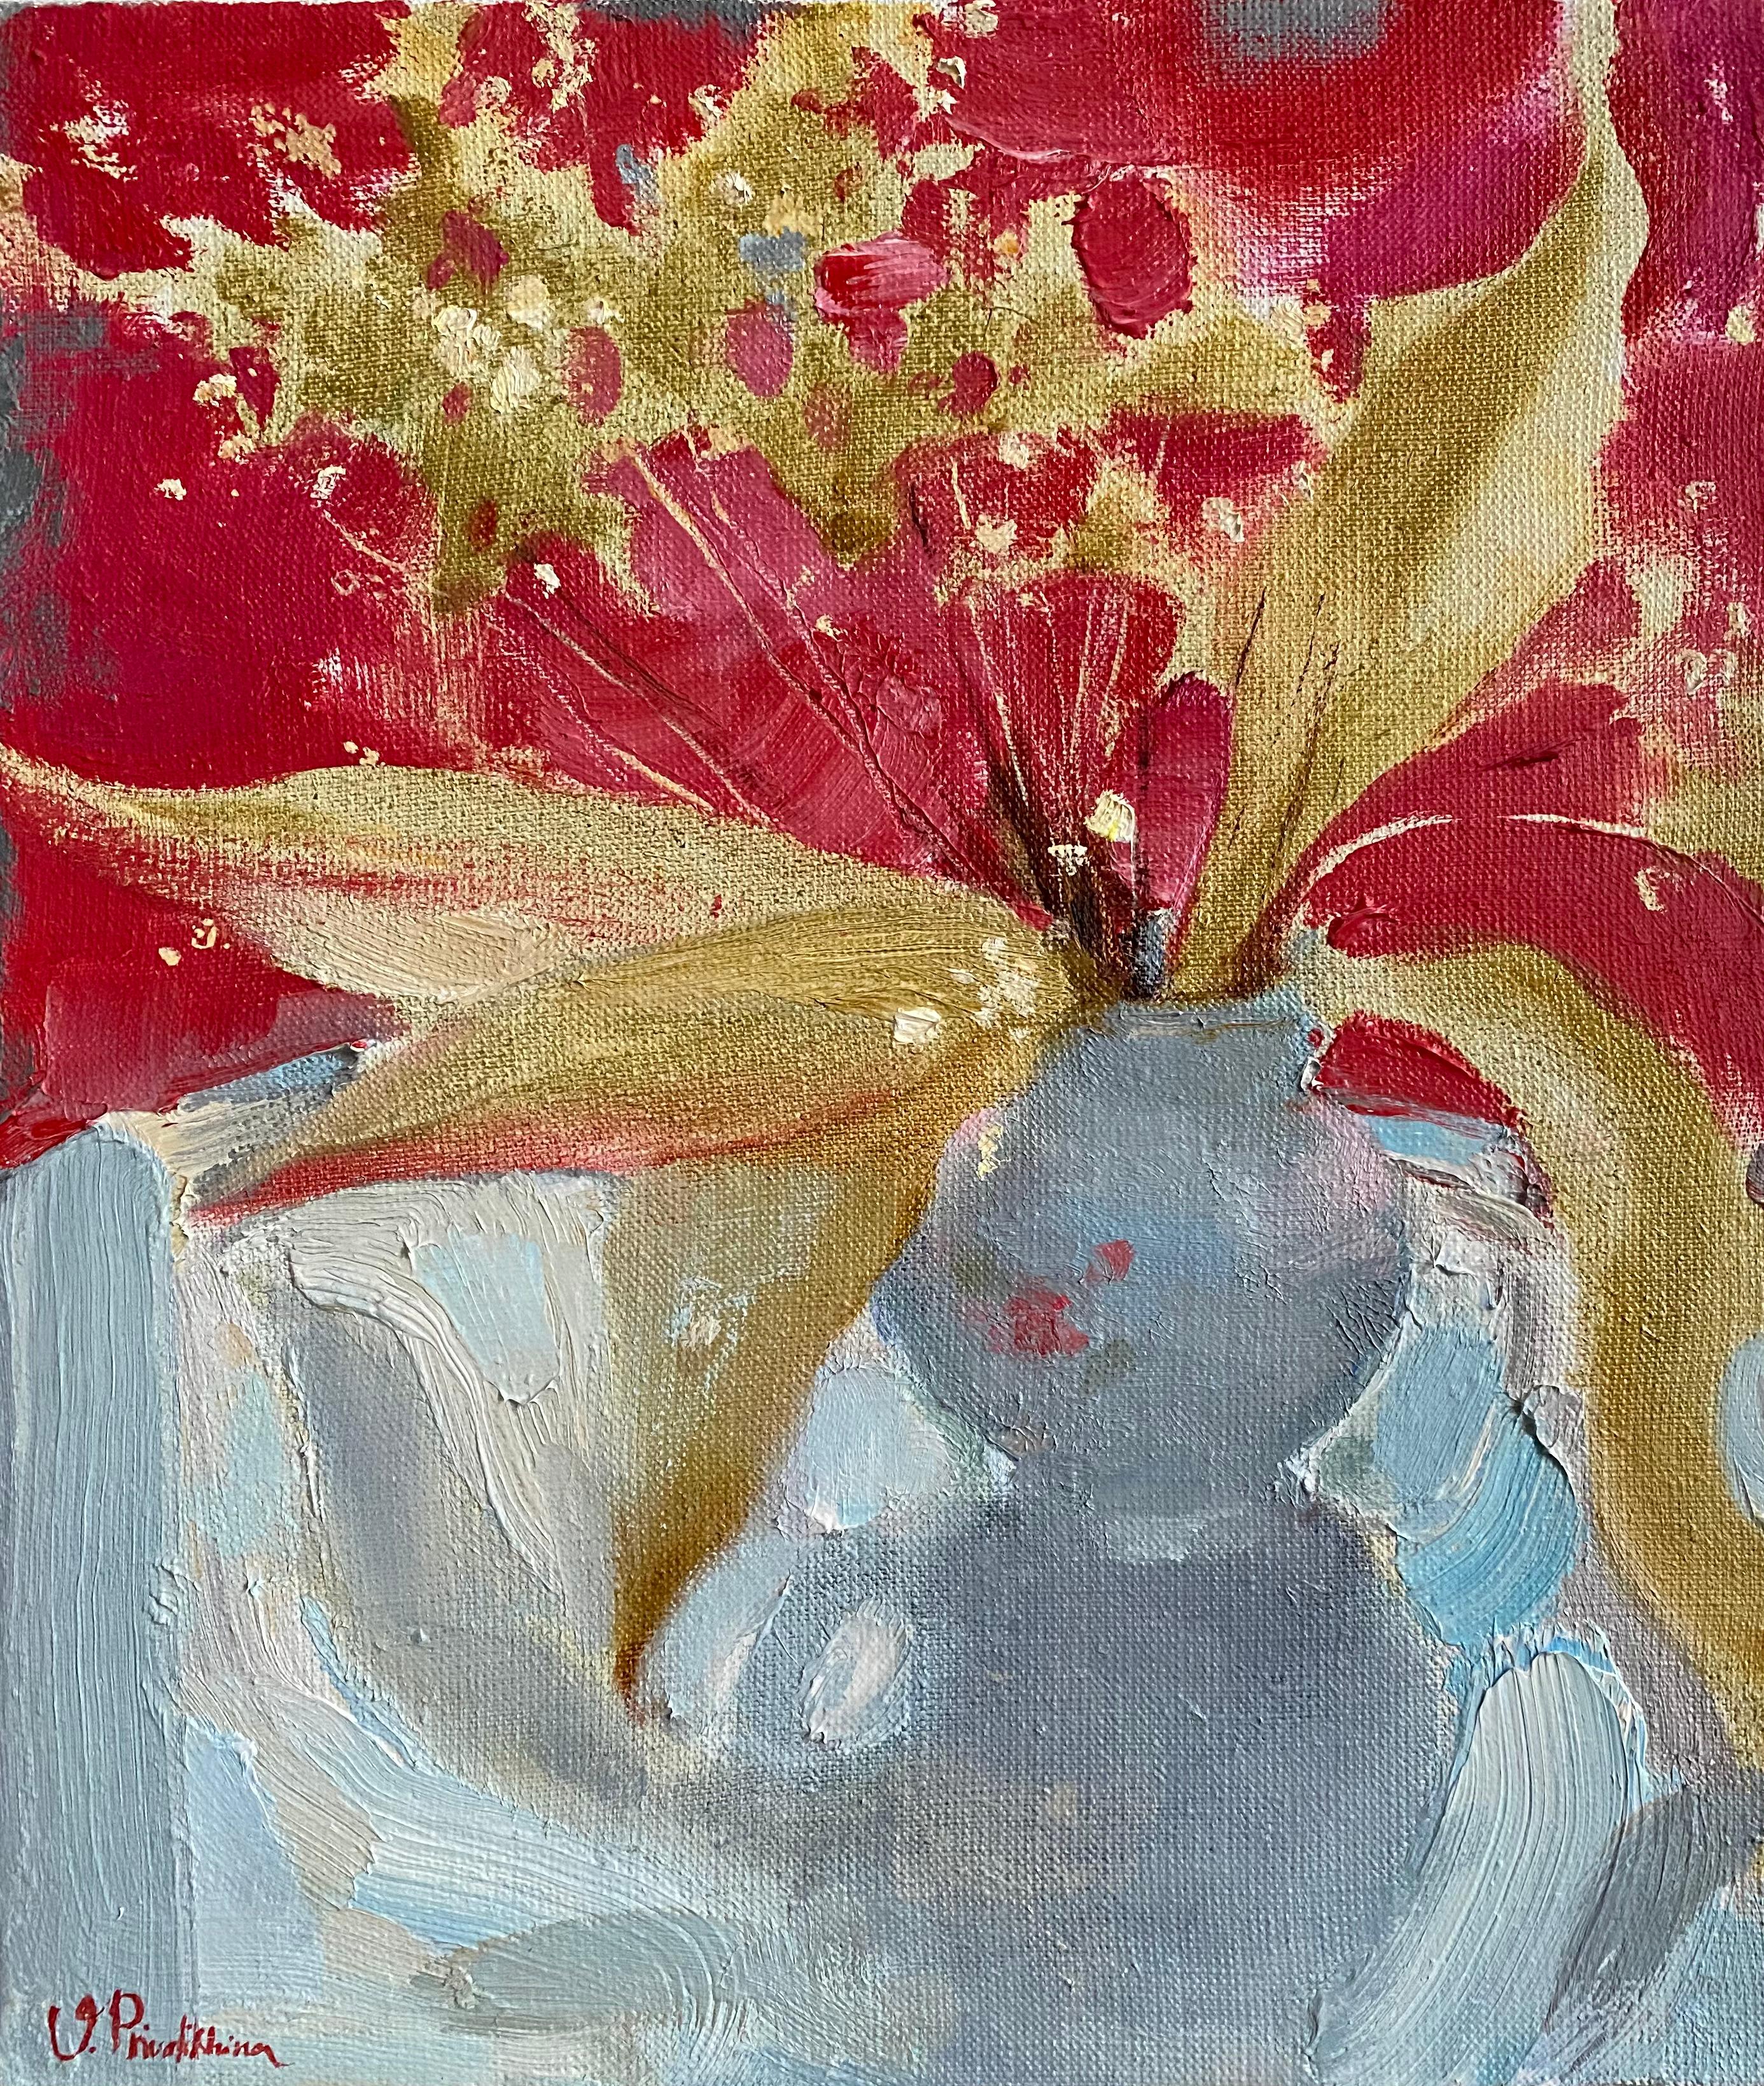 Dried Flowers On Red - 21st Century Impressionist Summer Oil Still Life Painting